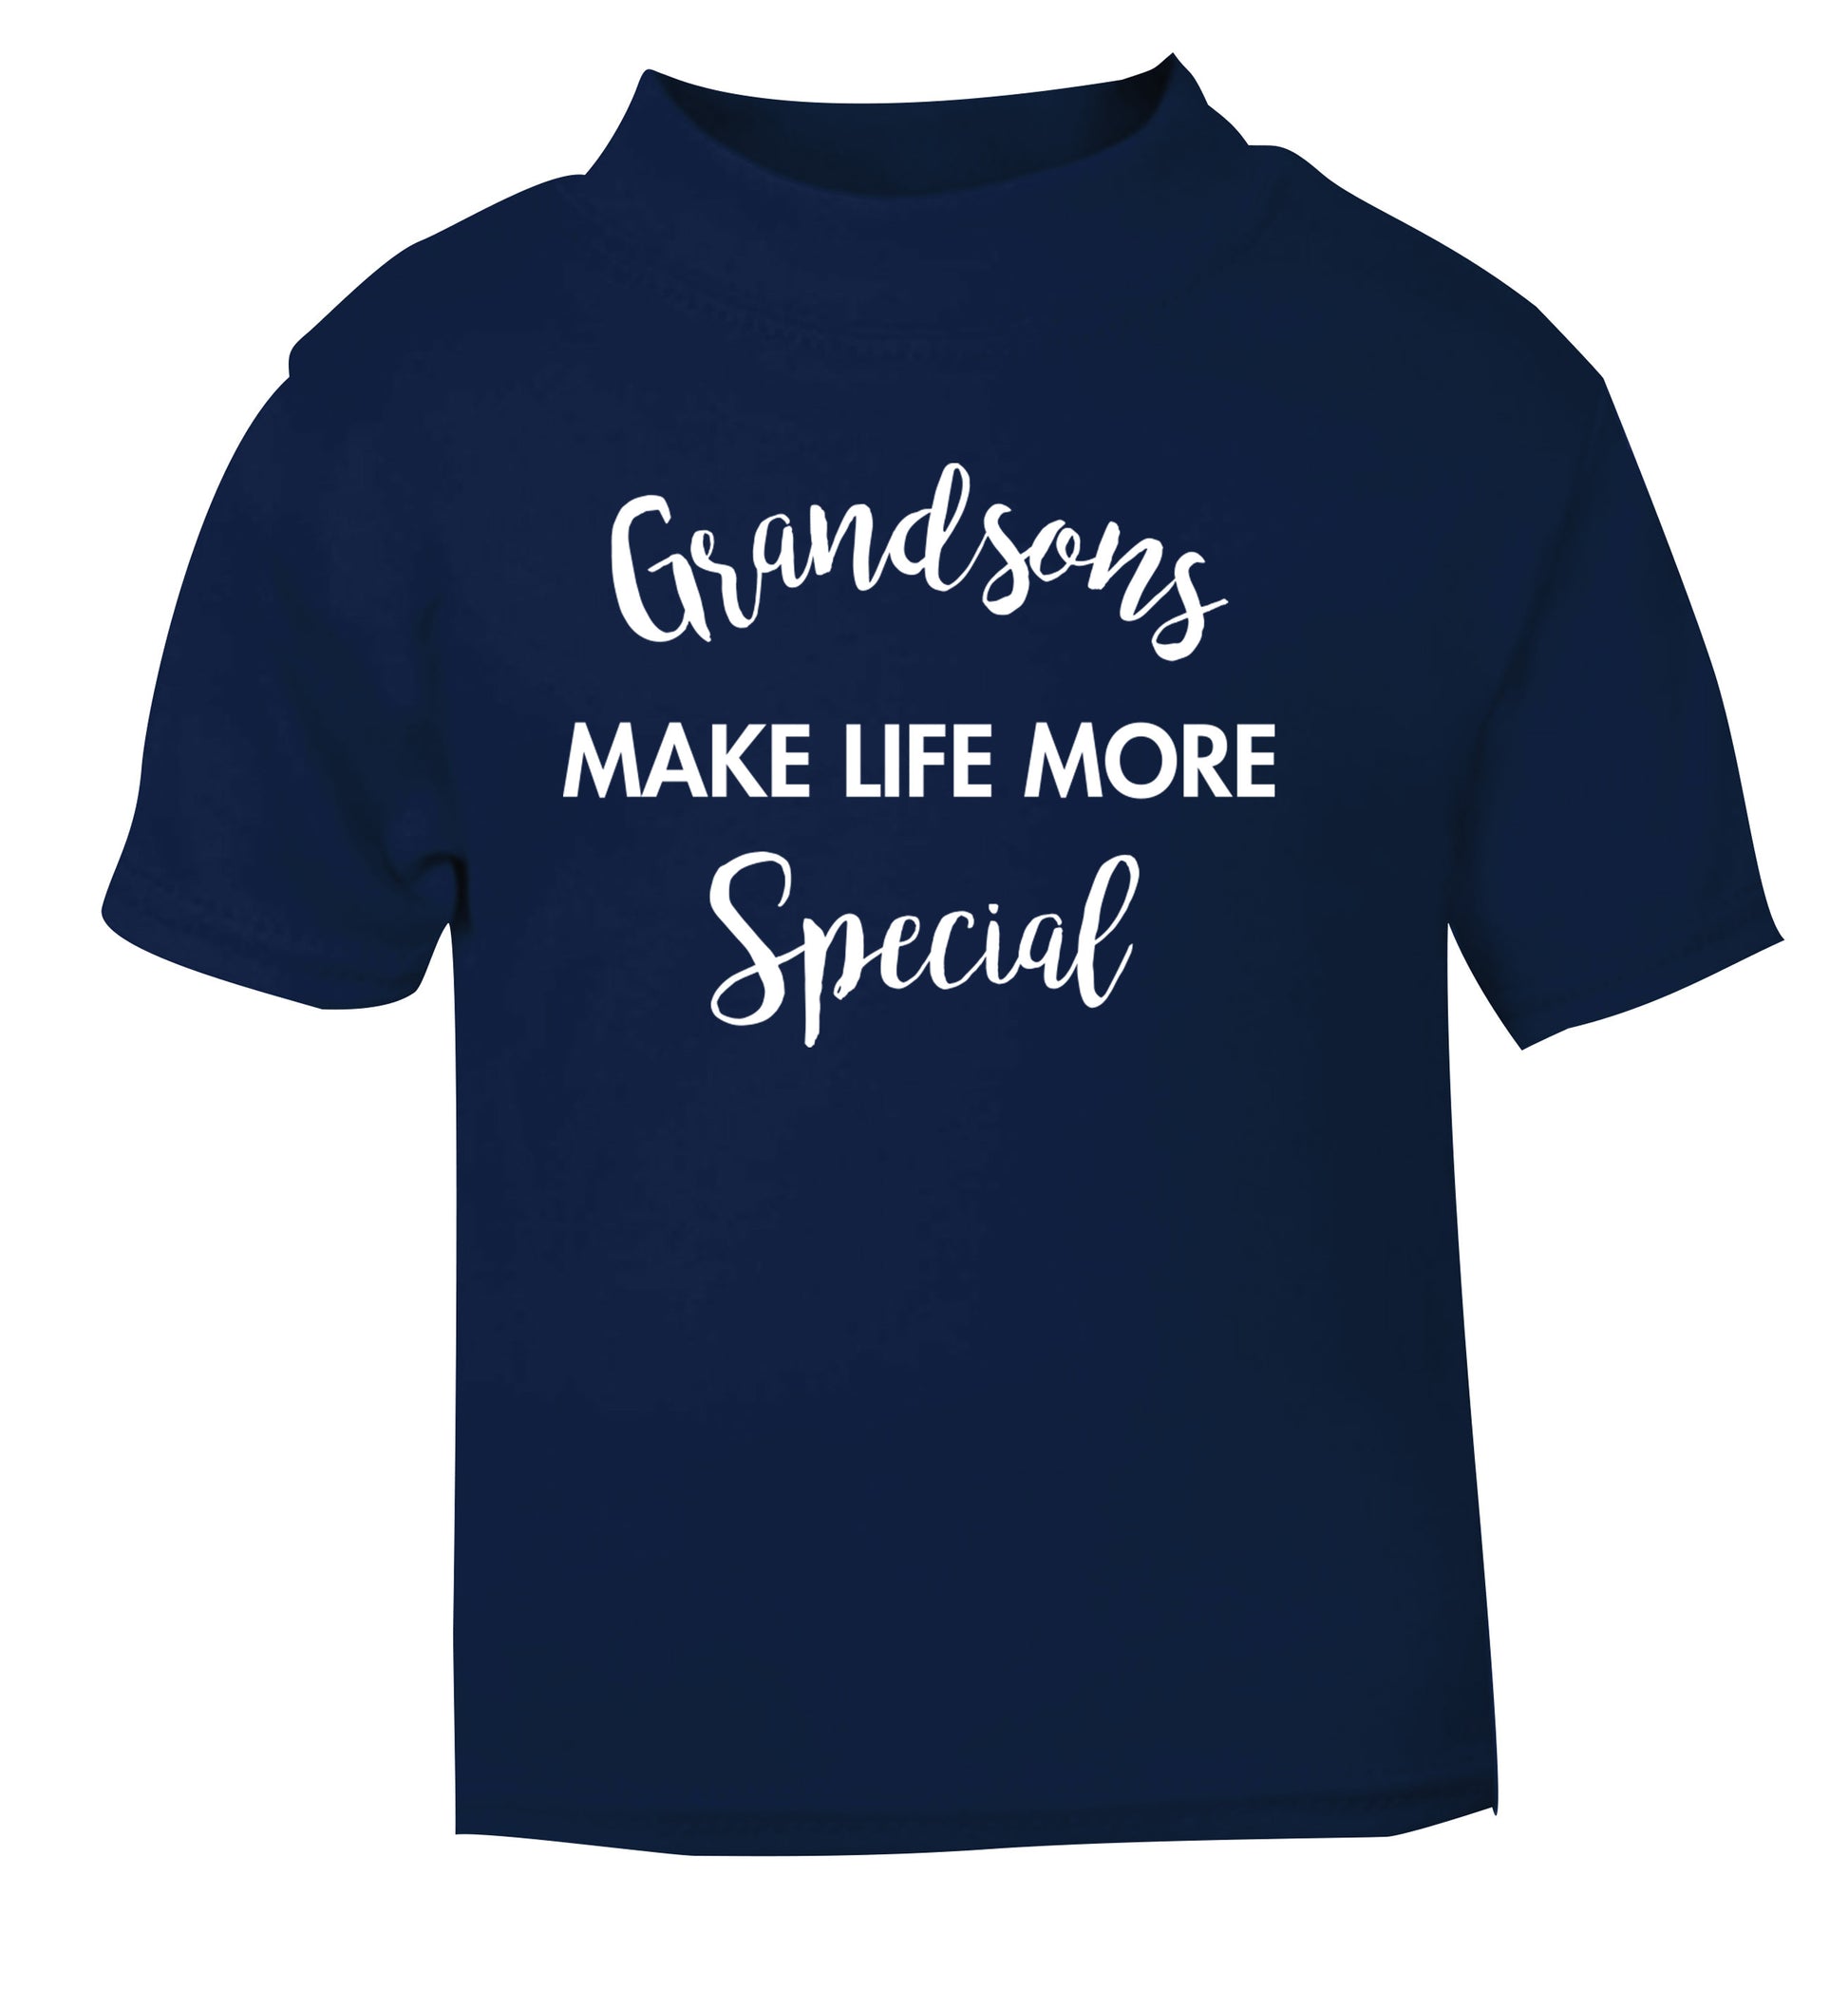 Grandsons make life more special navy Baby Toddler Tshirt 2 Years